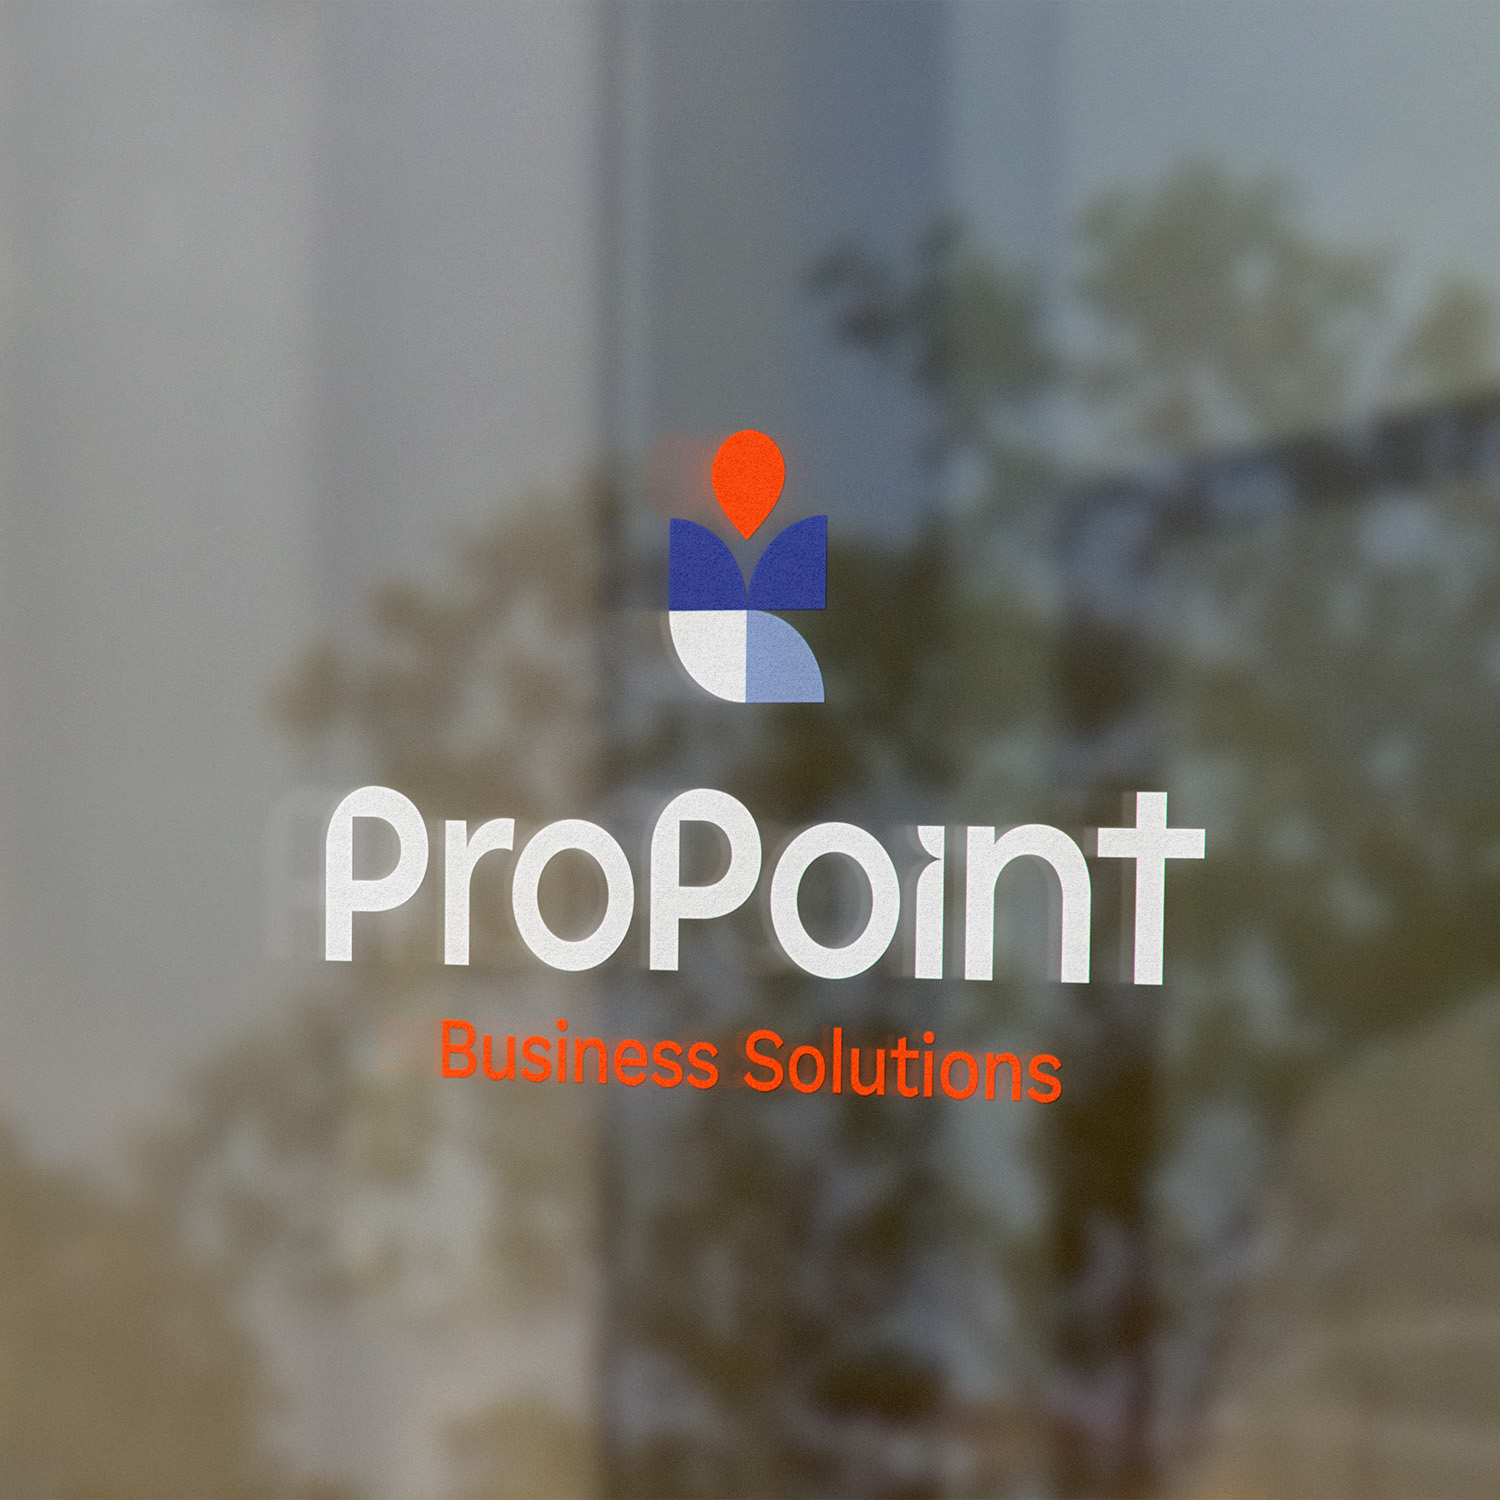 ProPoint Business Solutions Albury branding by Leysa Flores Design